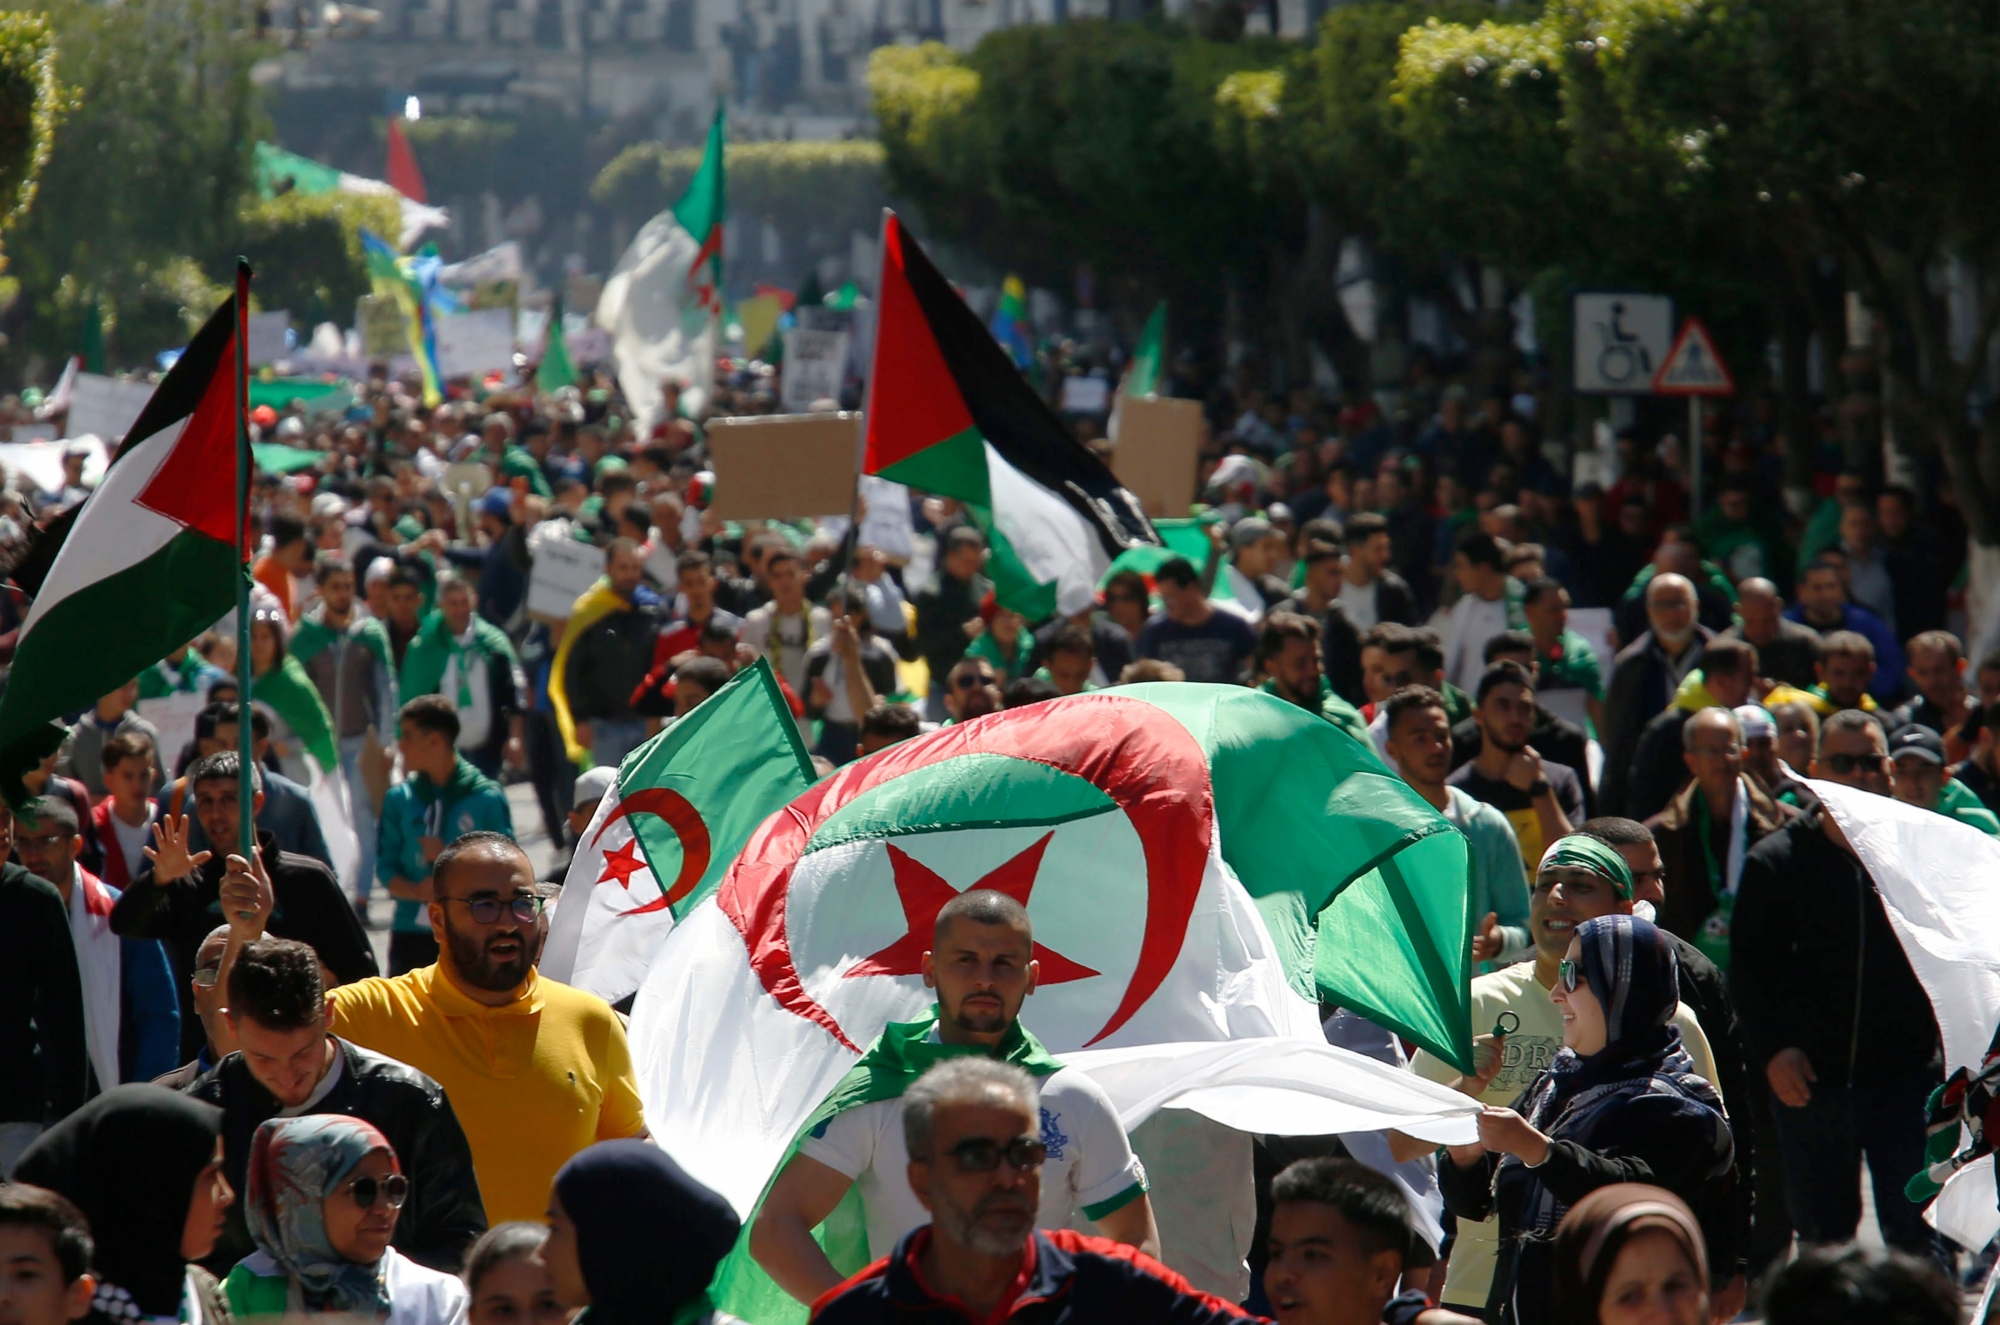 Demonstrators march with national flags during a protest in Algiers, Algeria, March 29, 2019. Algerians taking to the streets for their sixth straight Friday of protests aren't just angry at their ailing president, they want to bring down the entire political system that has sustained him. (AP Photo/Toufik Doudou) Algeria Protests